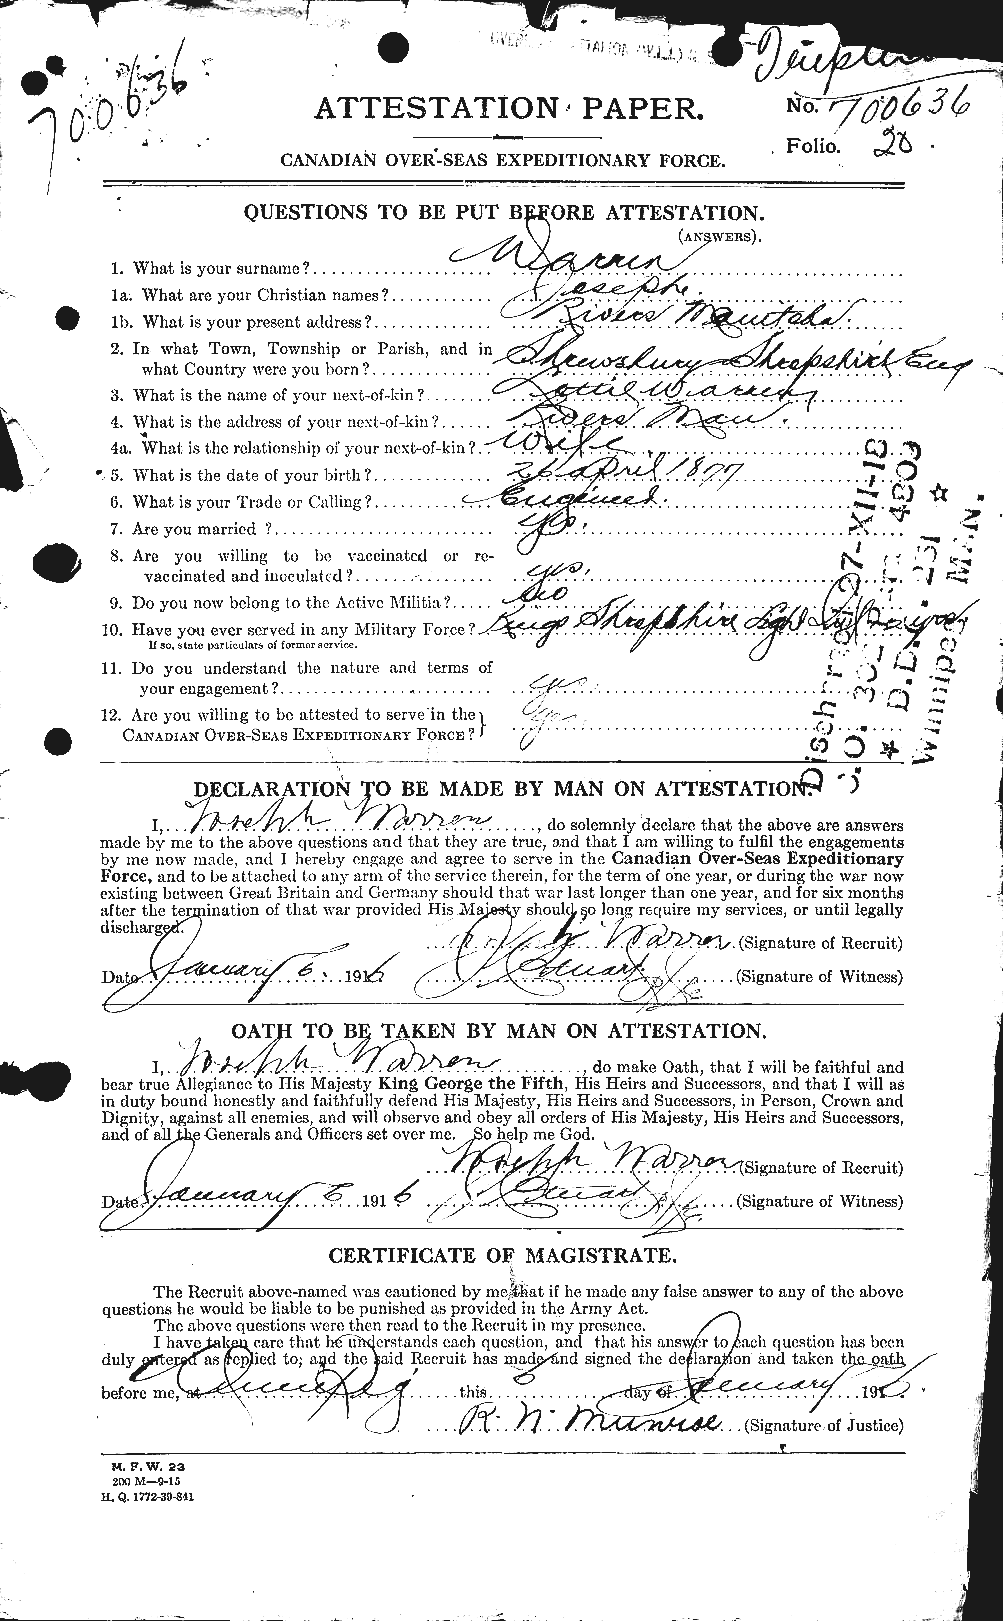 Personnel Records of the First World War - CEF 658565a